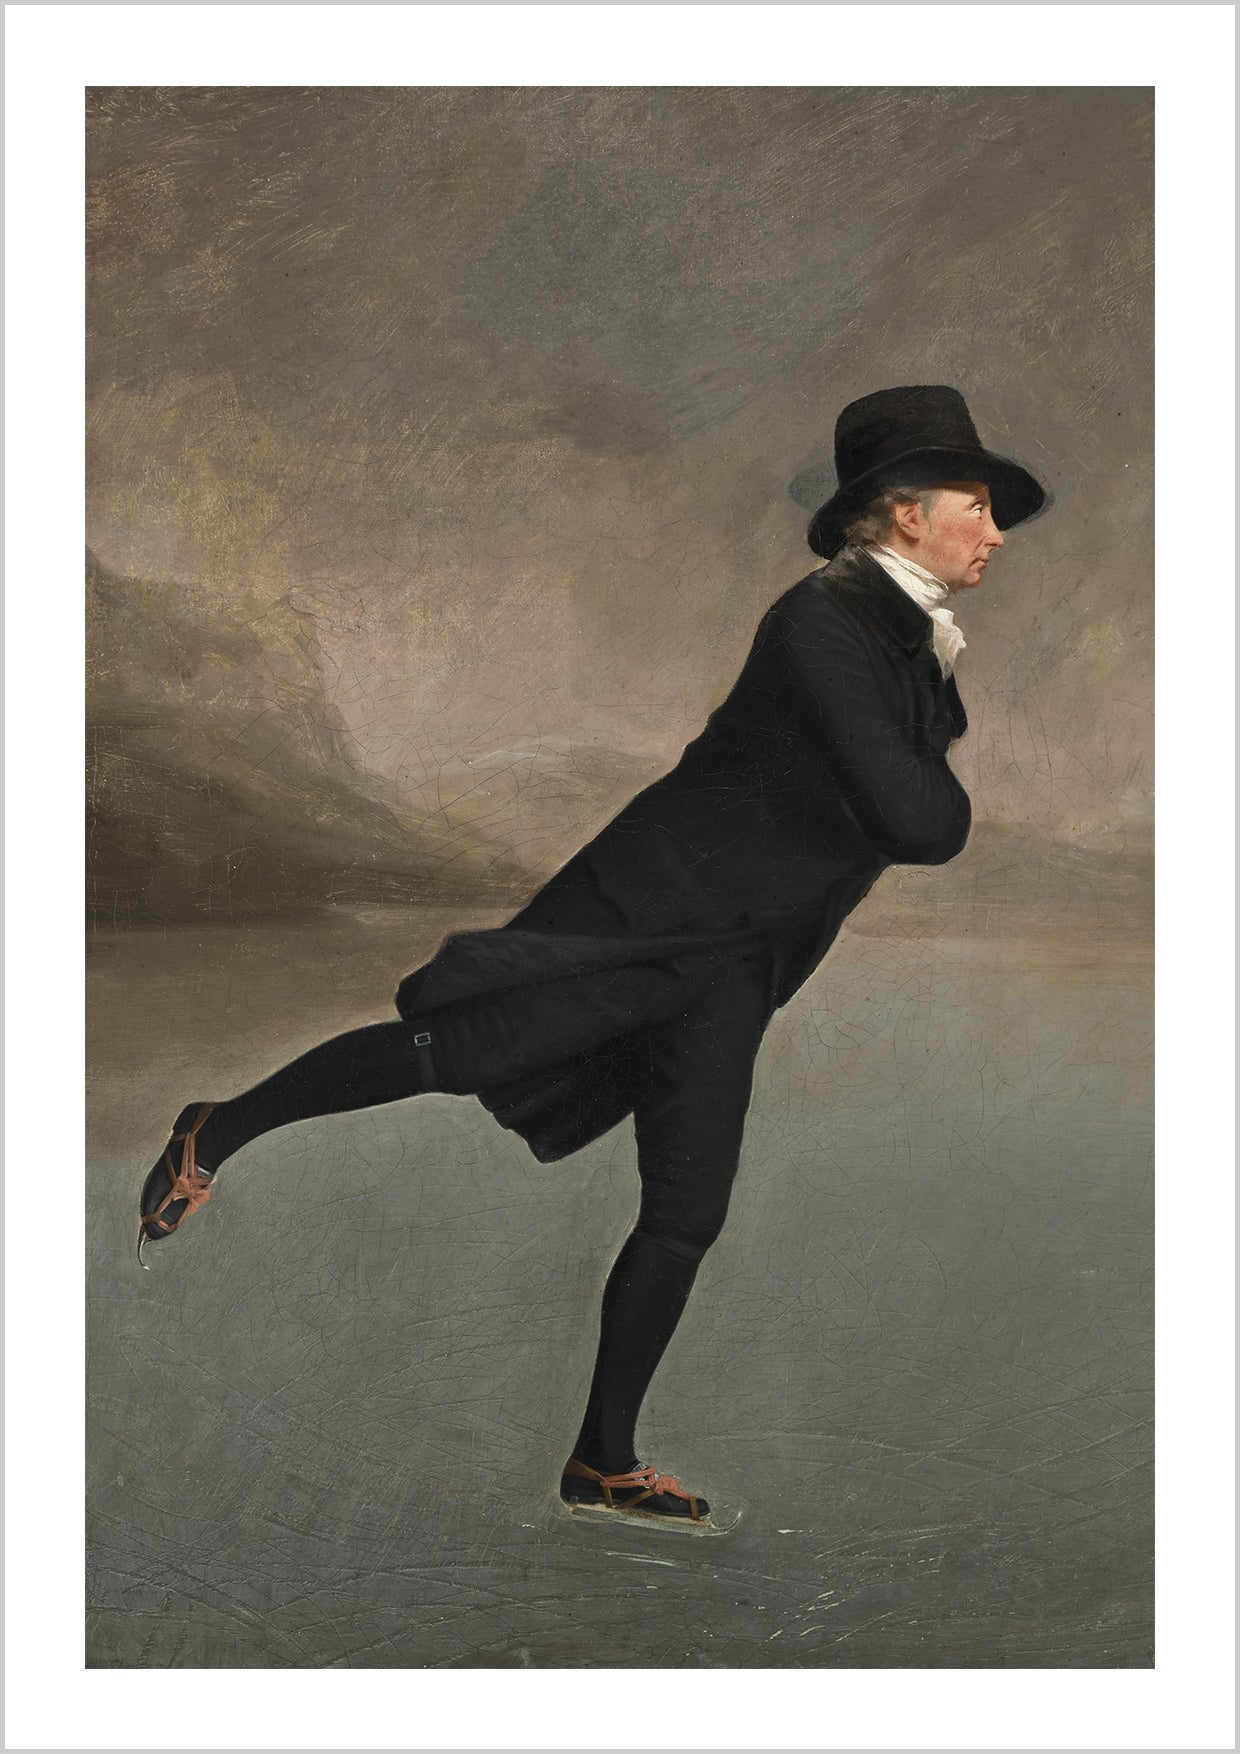 Vintage painting The Skating Minister! The original artwork was created by the Scottish portrait painter Henry Raeburn.